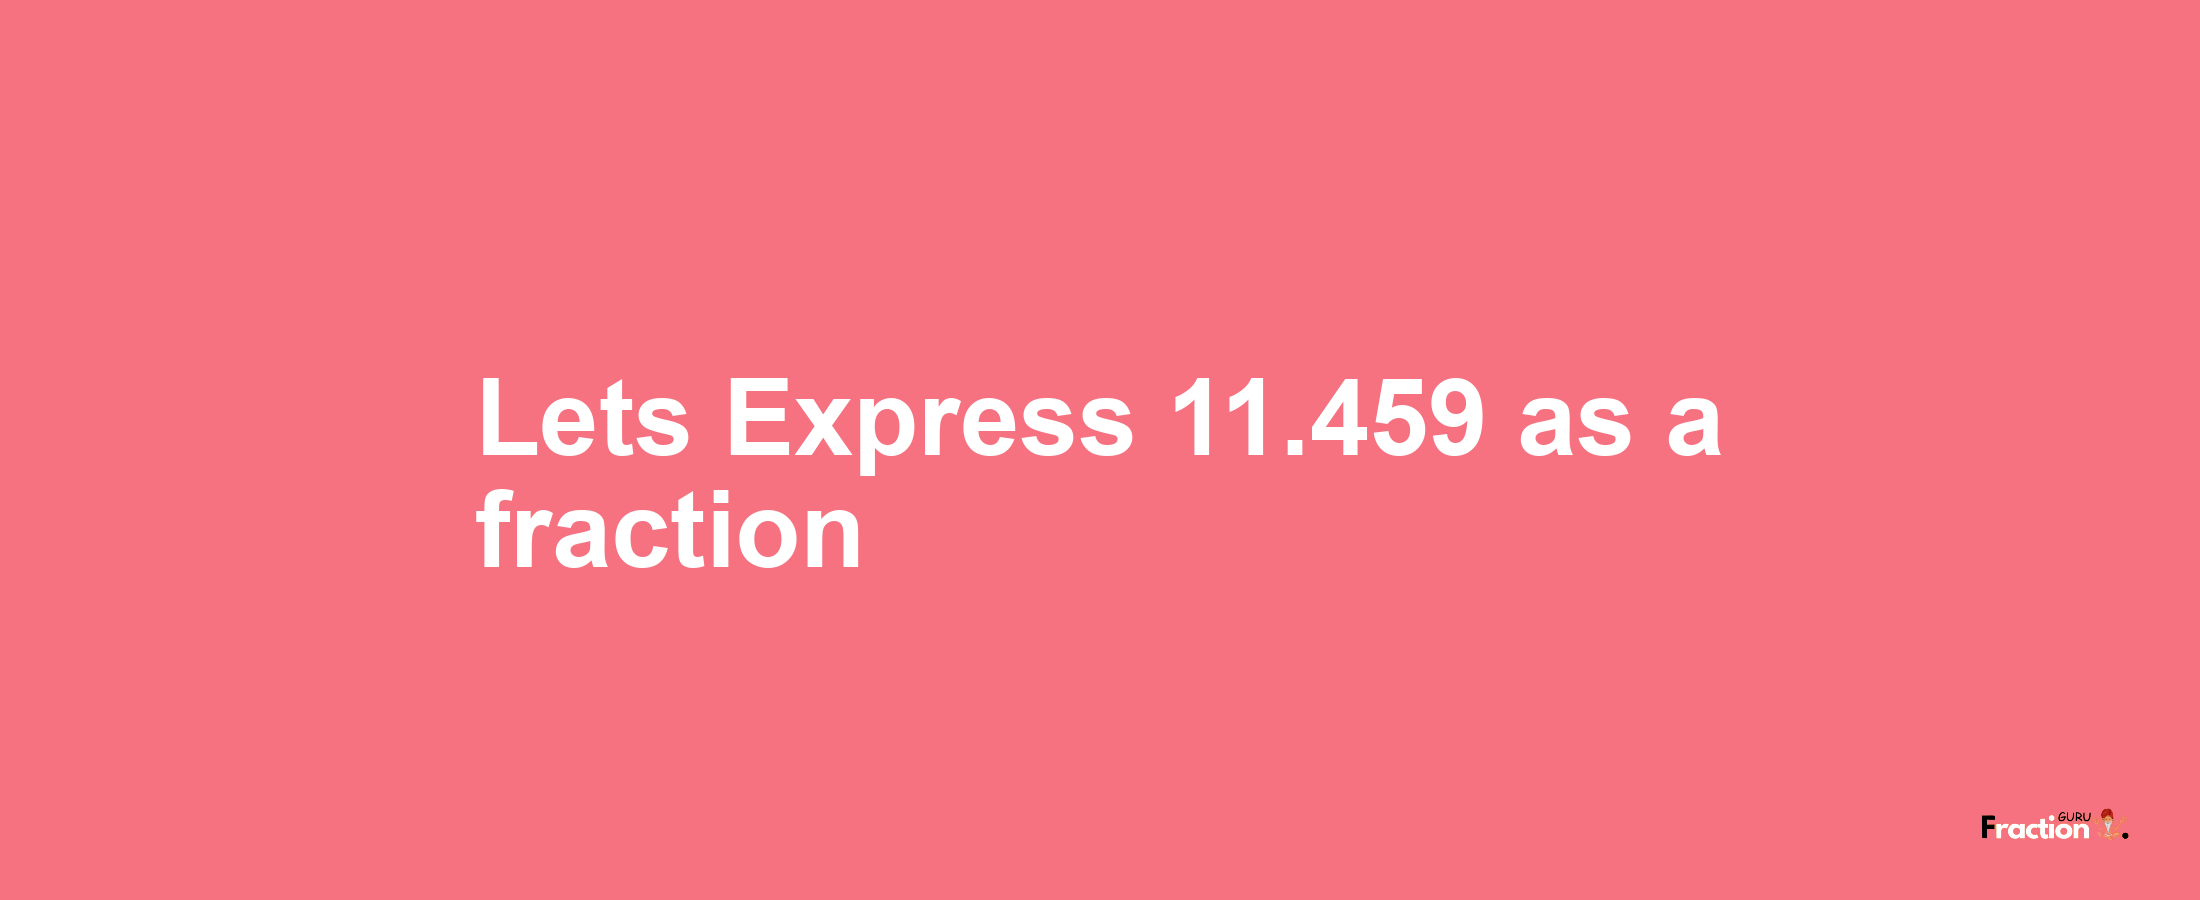 Lets Express 11.459 as afraction